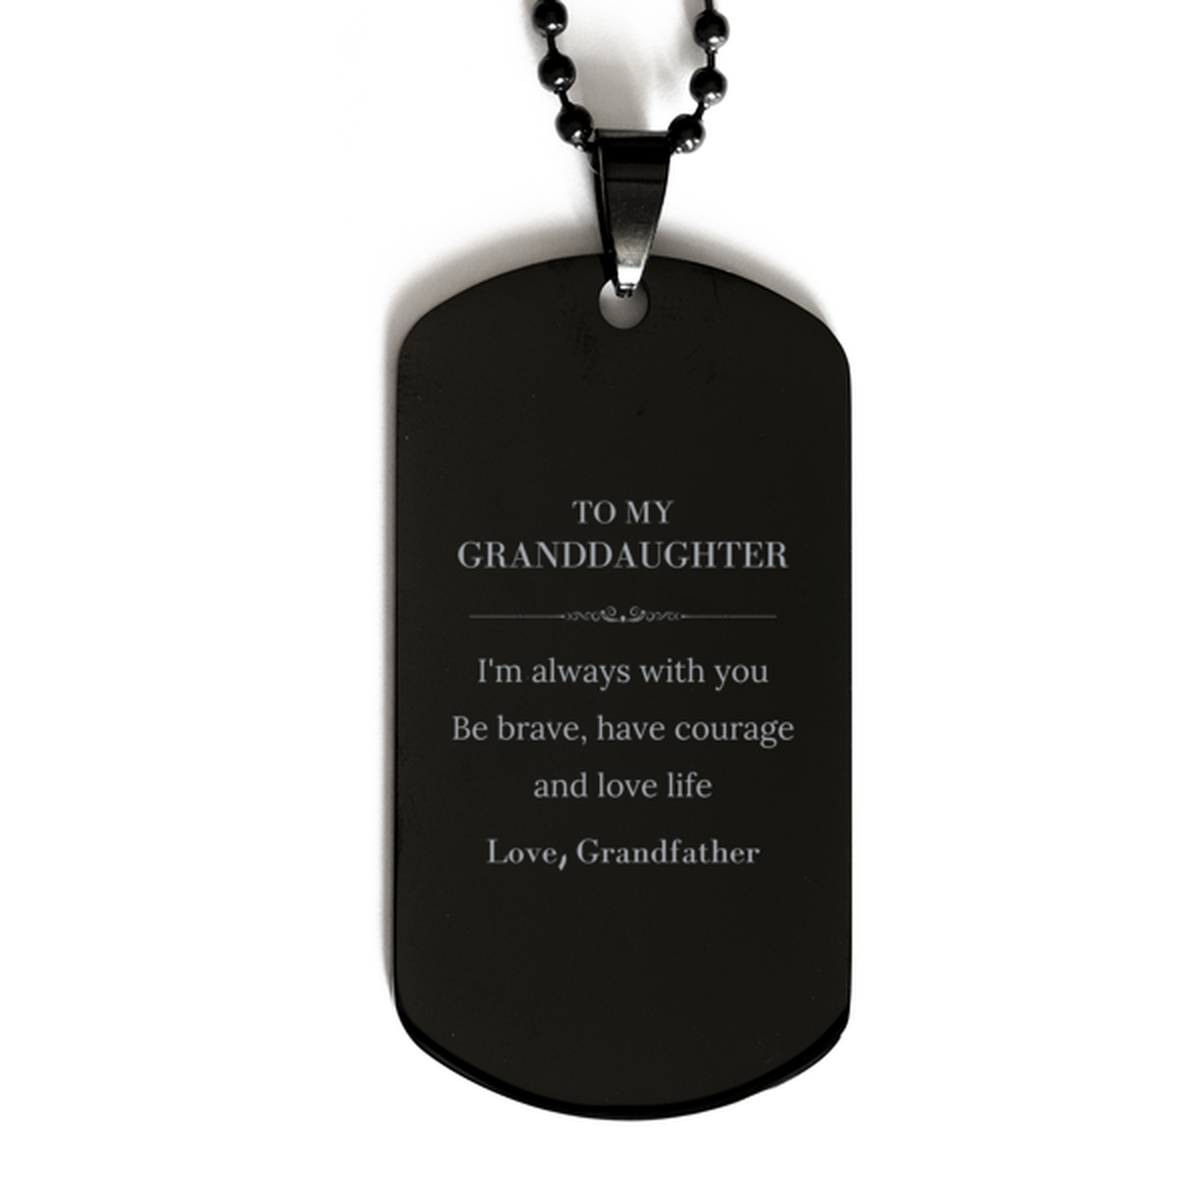 To My Granddaughter Gifts from Grandfather, Unique Black Dog Tag Inspirational Christmas Birthday Graduation Gifts for Granddaughter I'm always with you. Be brave, have courage and love life. Love, Grandfather